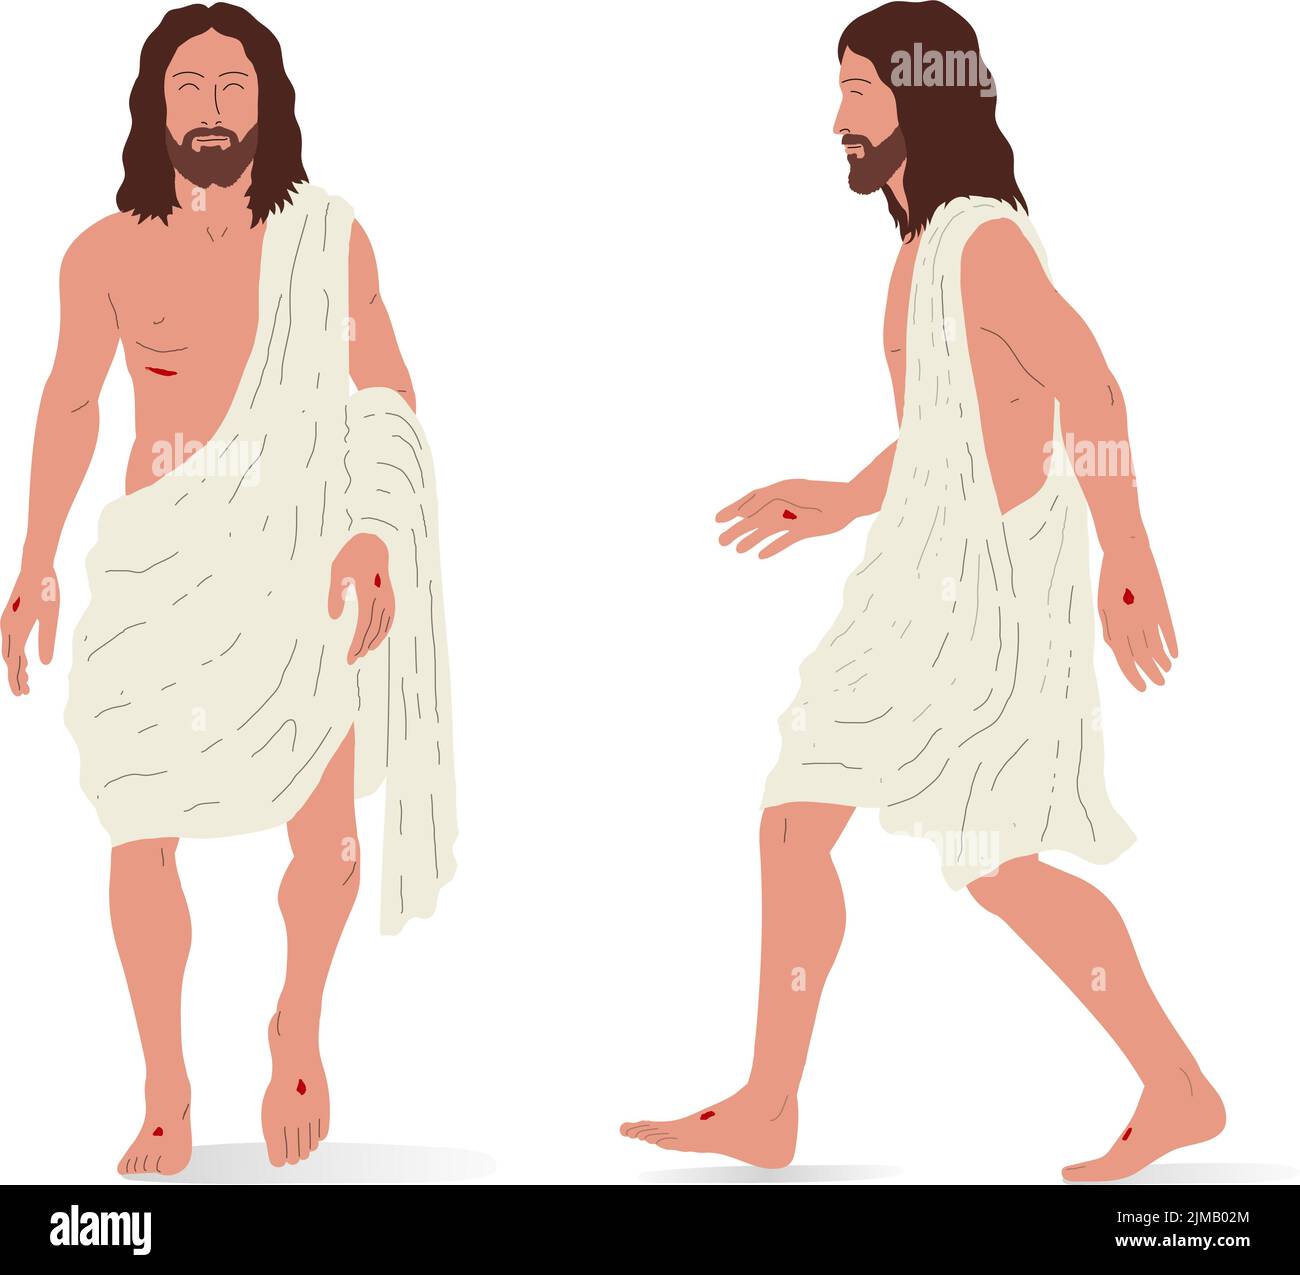 Risen Jesus standing, front and side view. Isometric vector illustration, isolated figure. Stock Vector